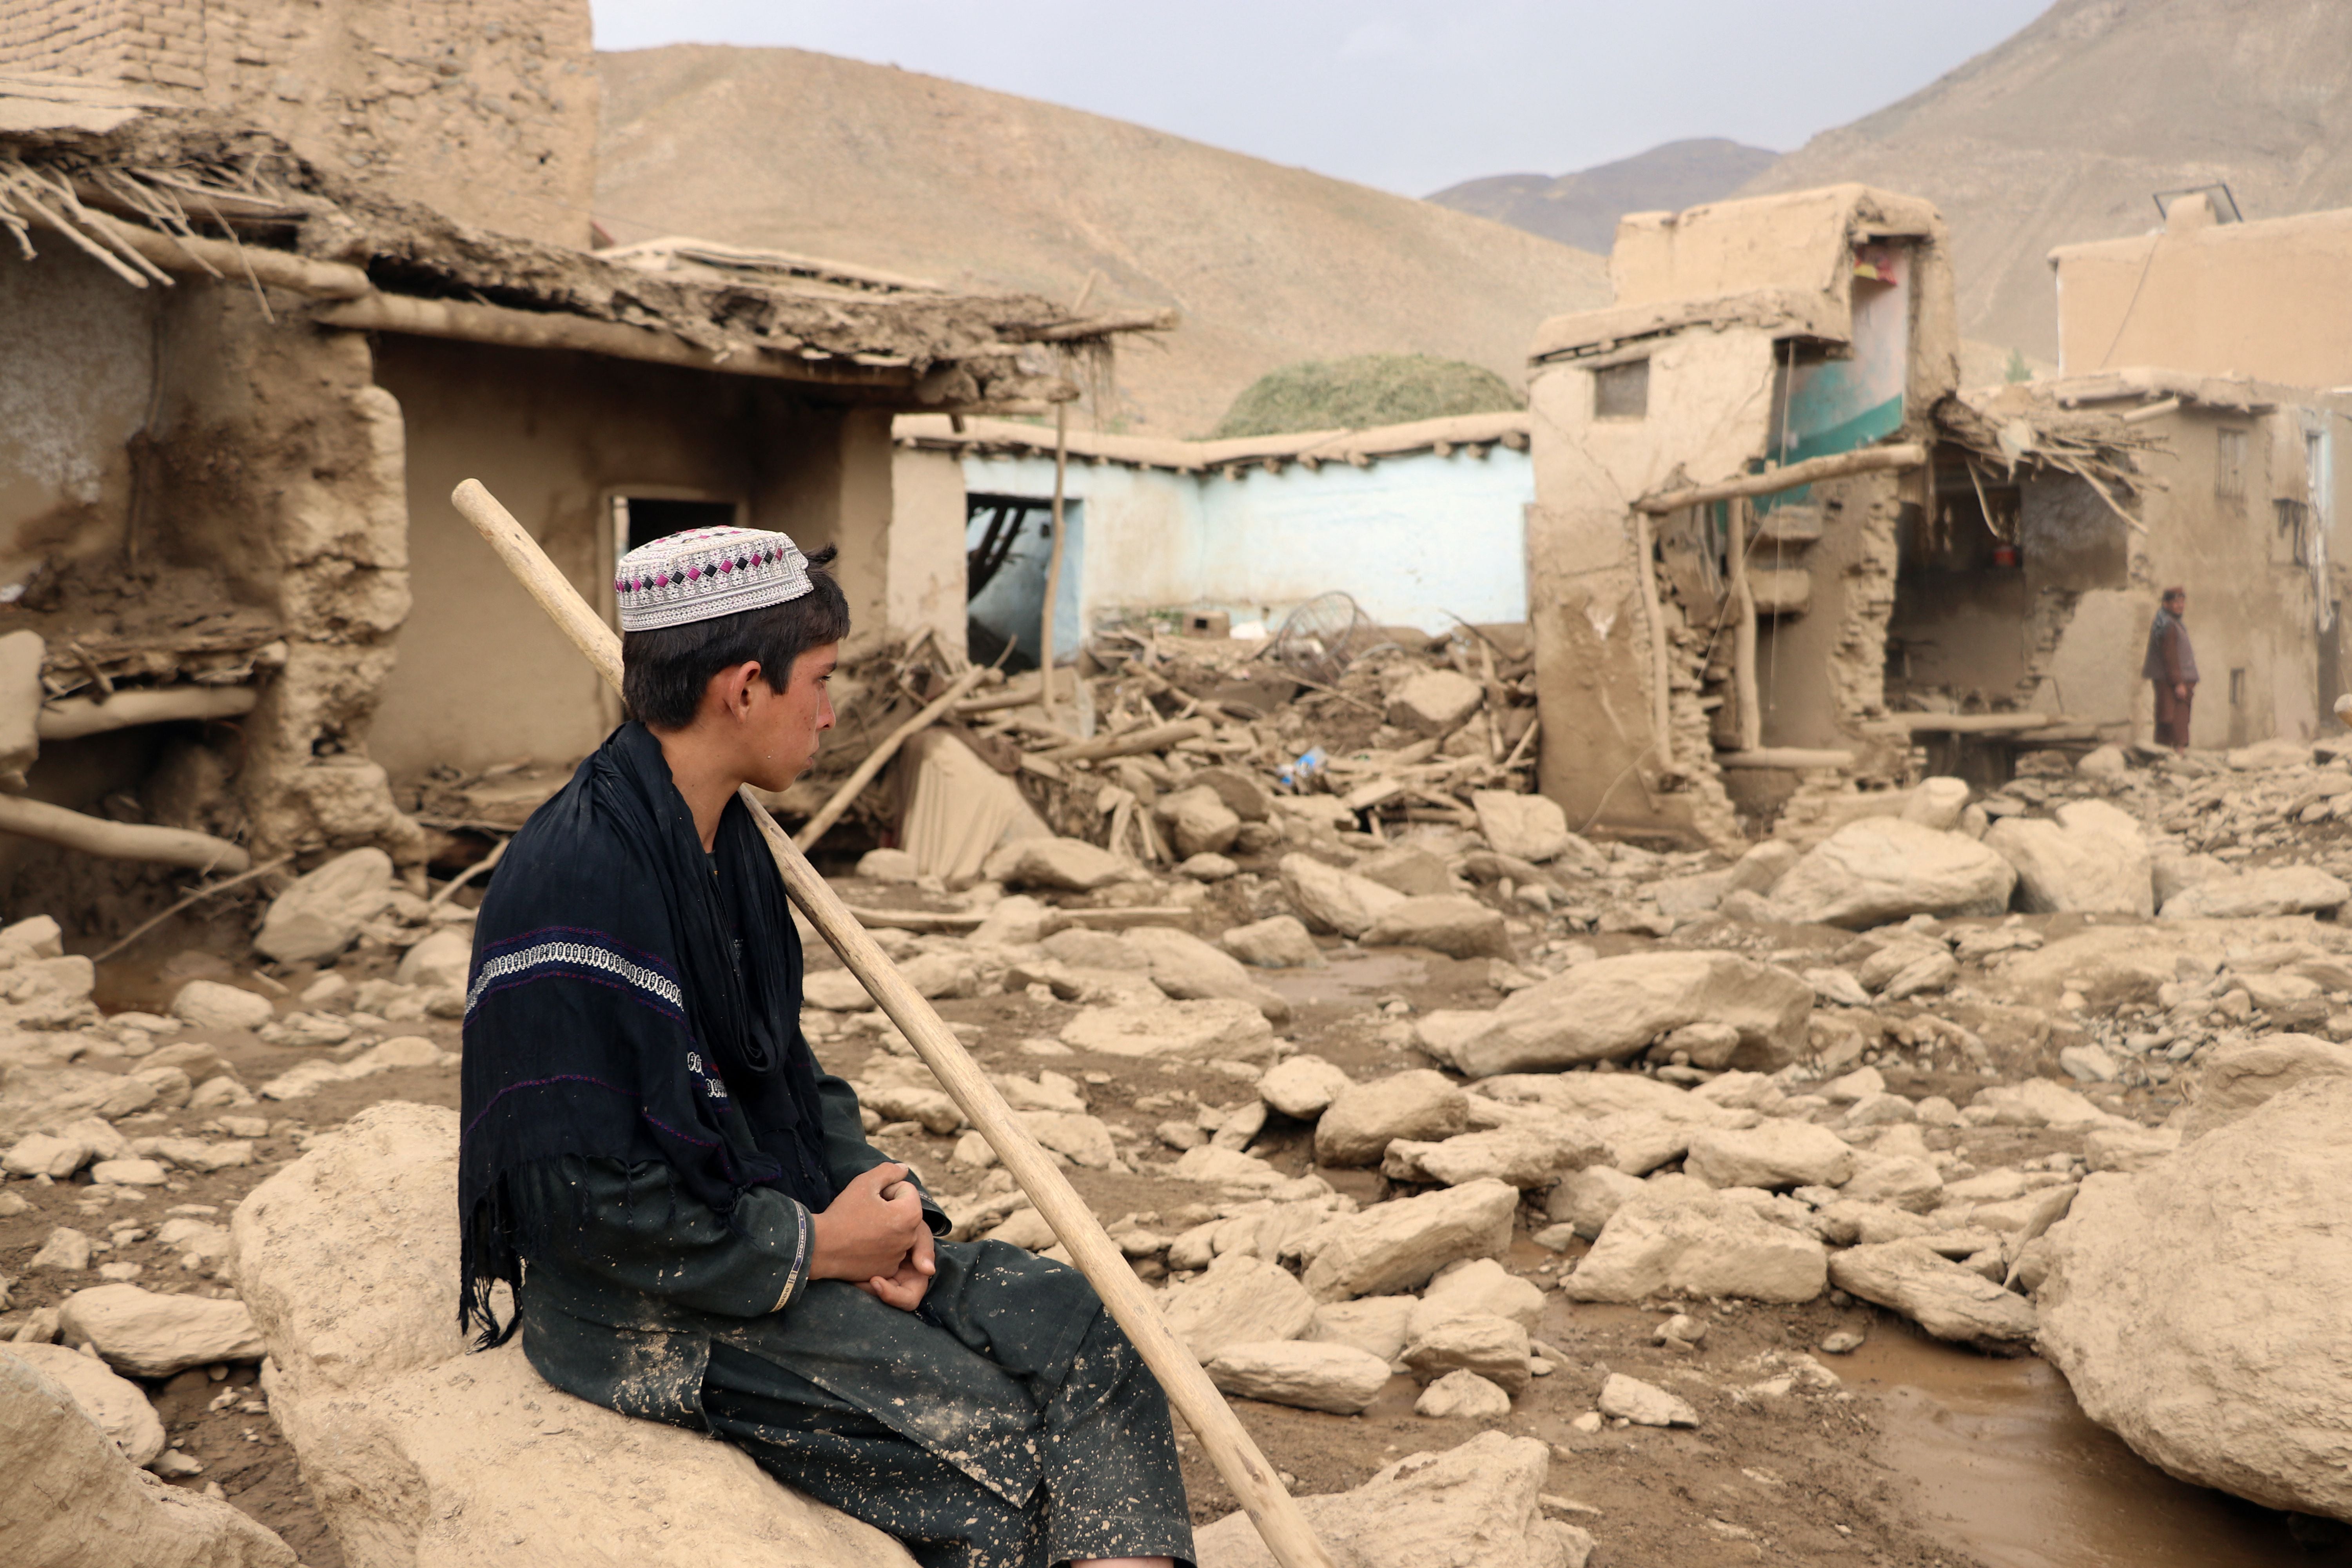 An Afghan resident sits next to his house that was damaged in flash floods in the Jalrez district of Maidan Wardak province